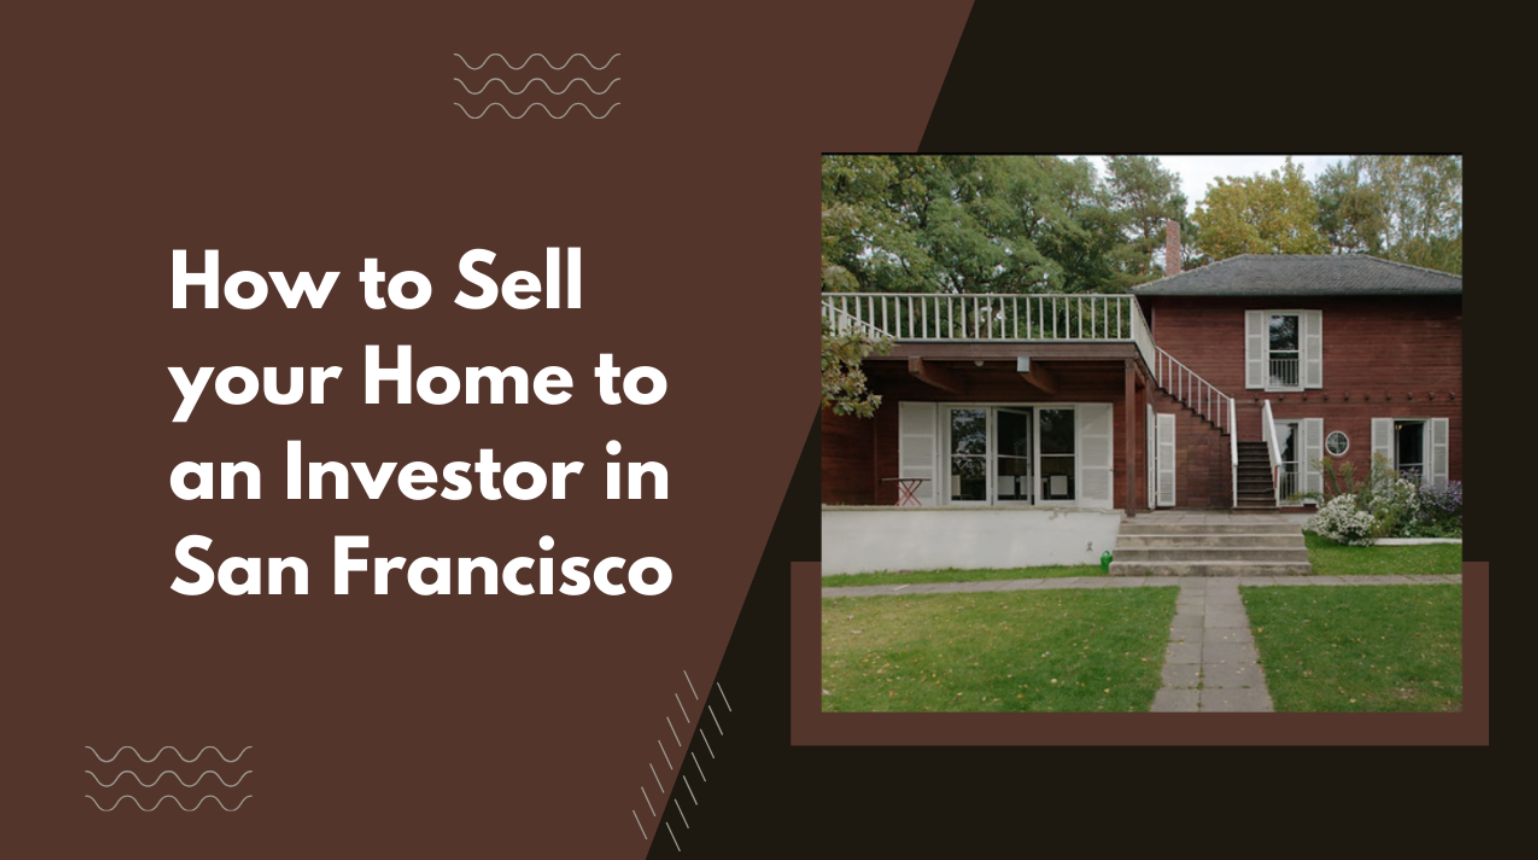 How to Sell your Home to an Investor in San Francisco